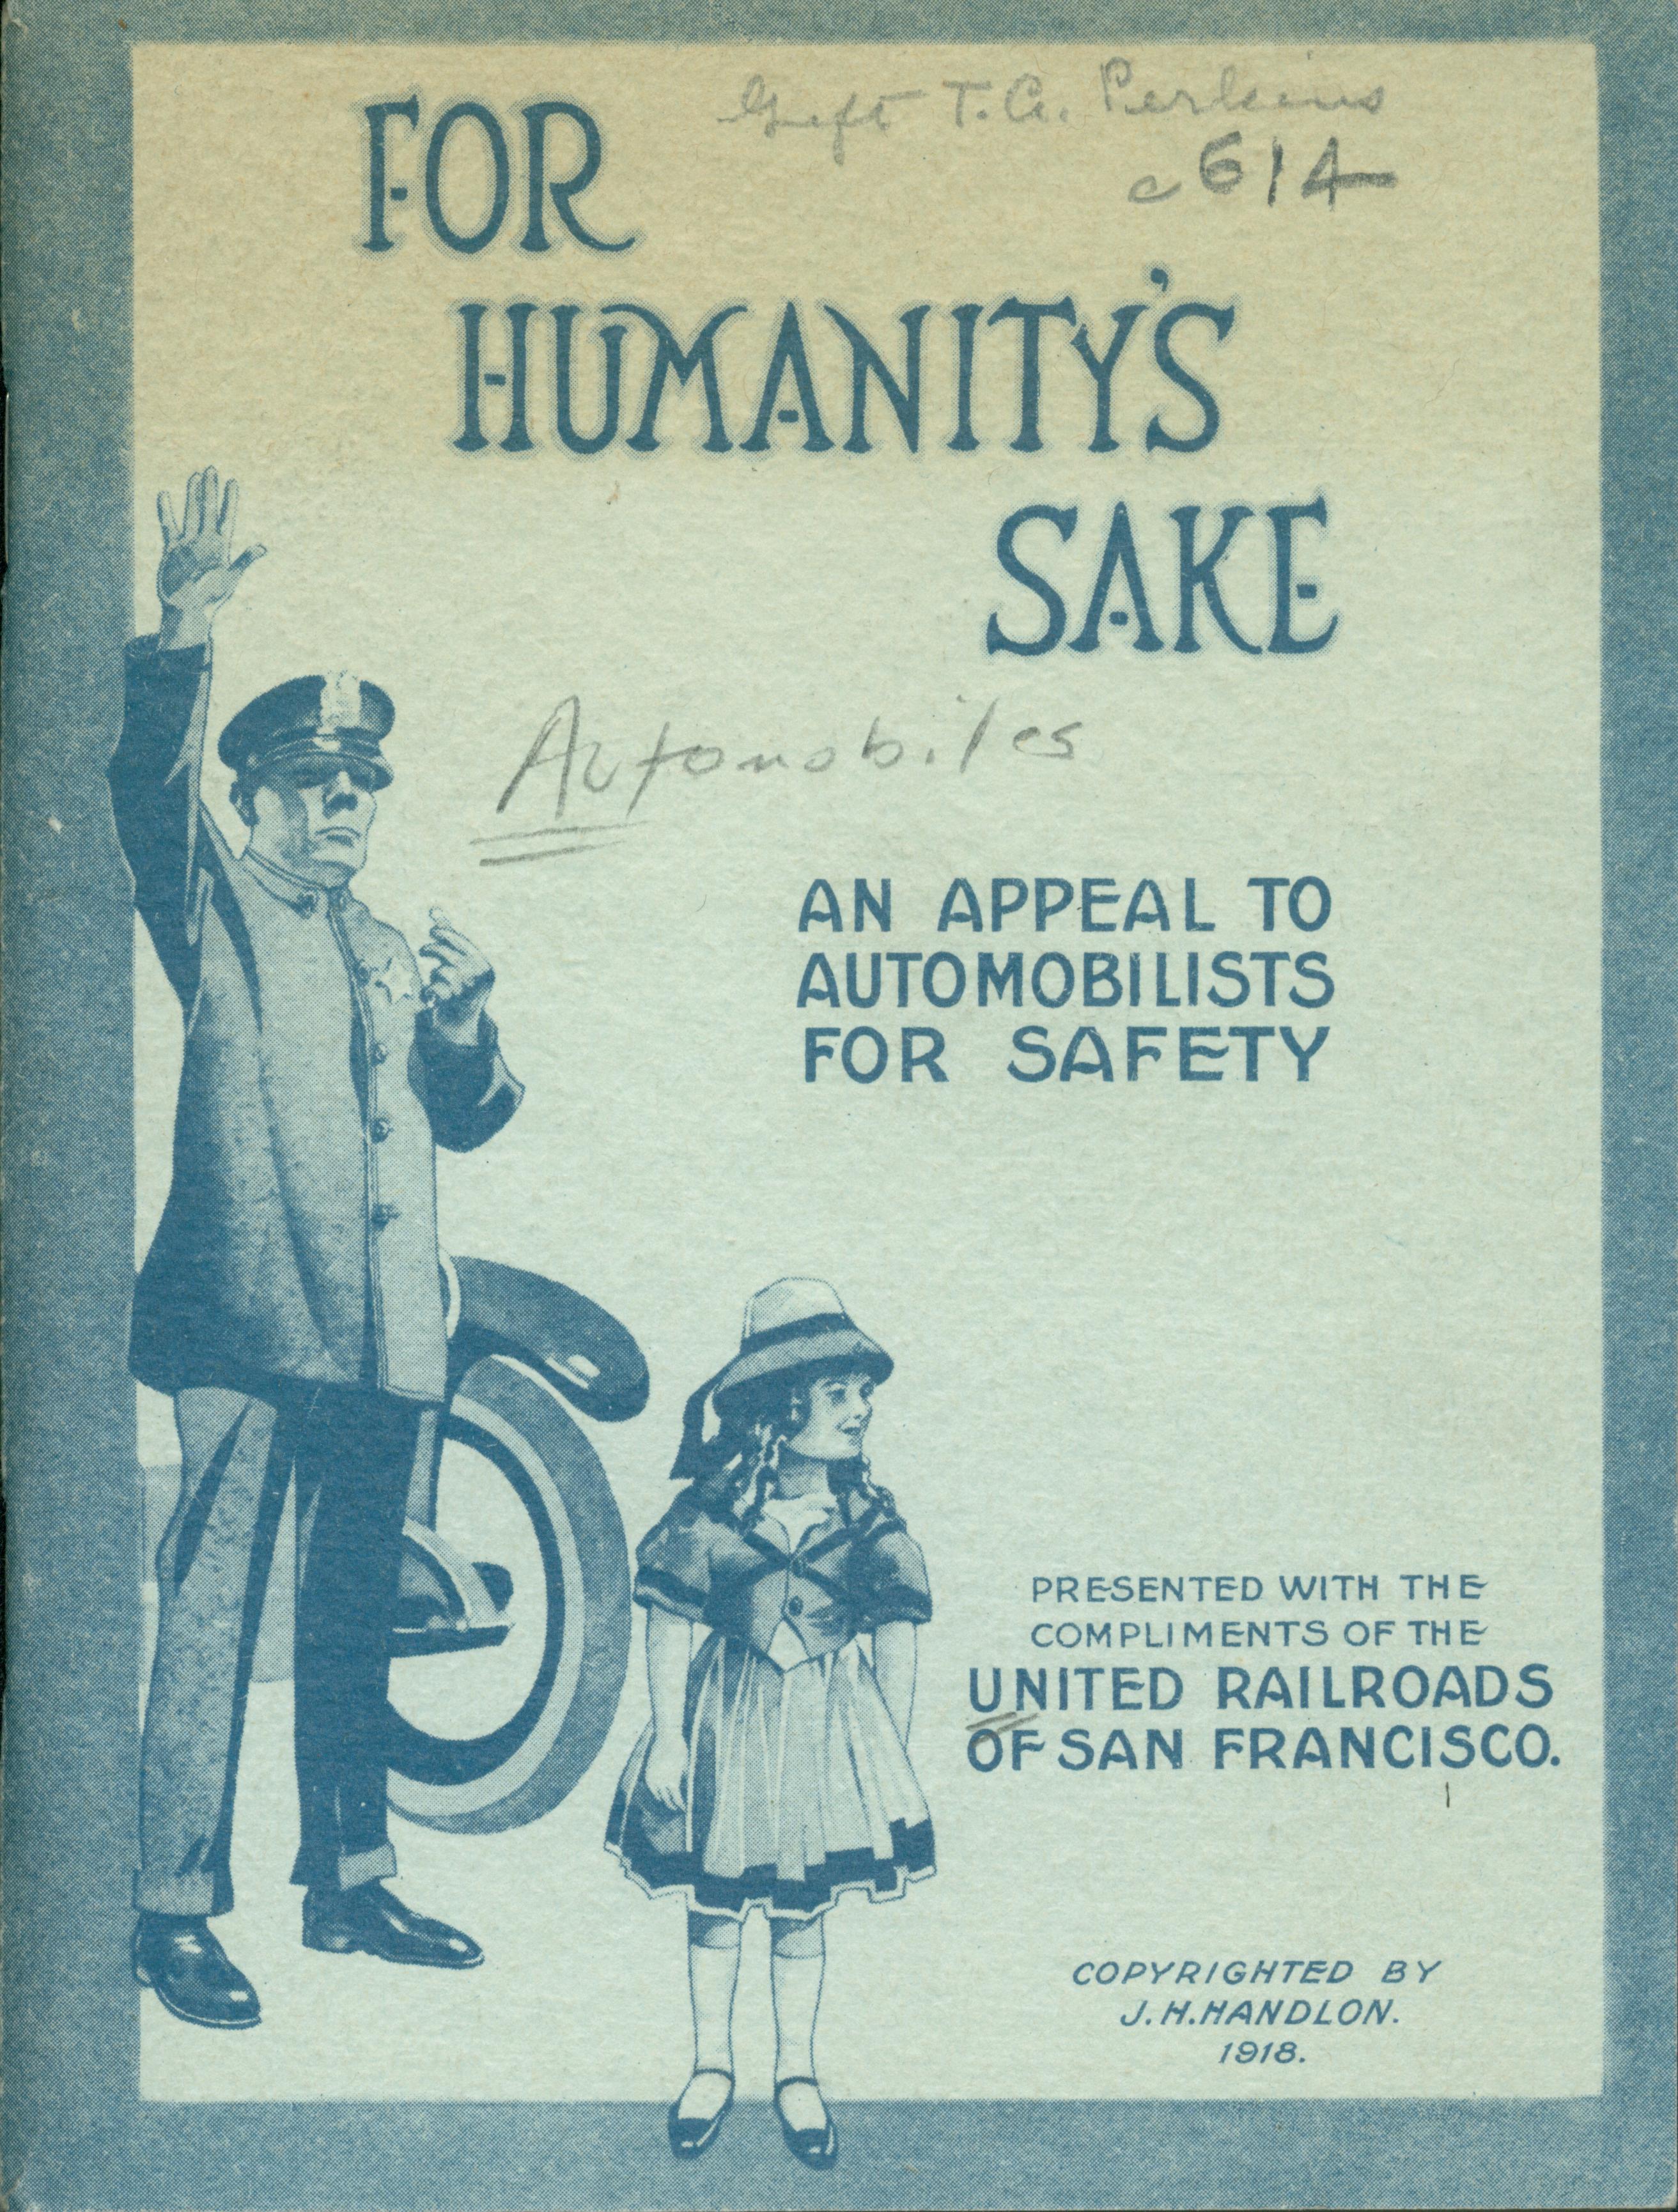 The front cover shows a crossing guard holding a whistle and stopping traffic while a little girl waits to cross